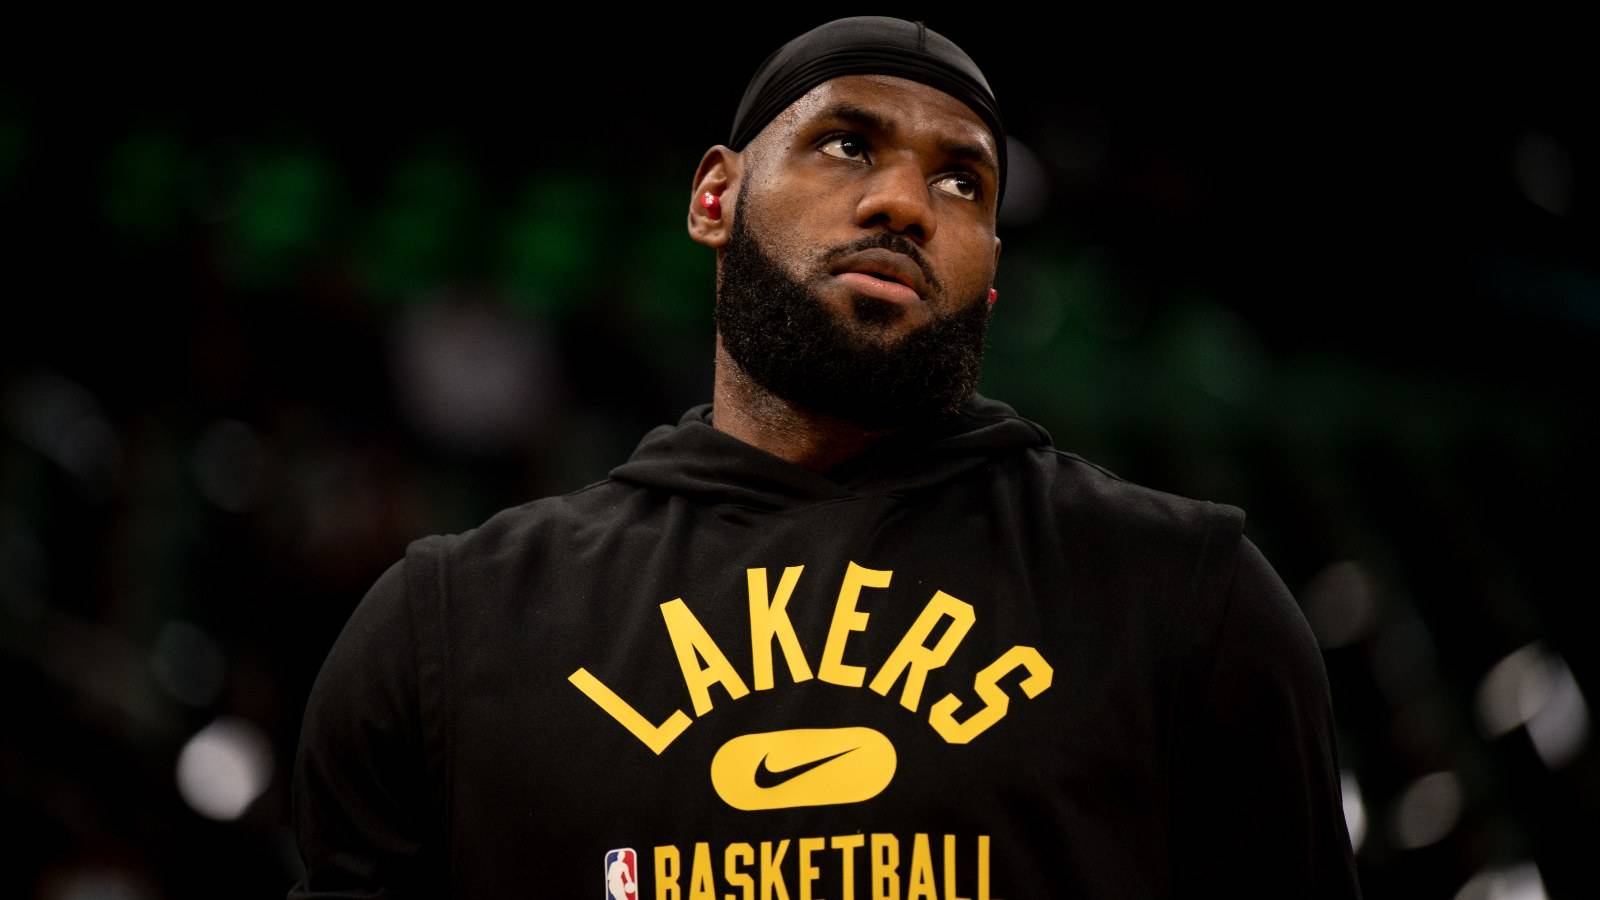 LeBron James #6 of the Los Angeles Lakers warms up before a game against the Boston Celtics at TD Garden on November 19, 2021 in Boston, Massachusetts. 